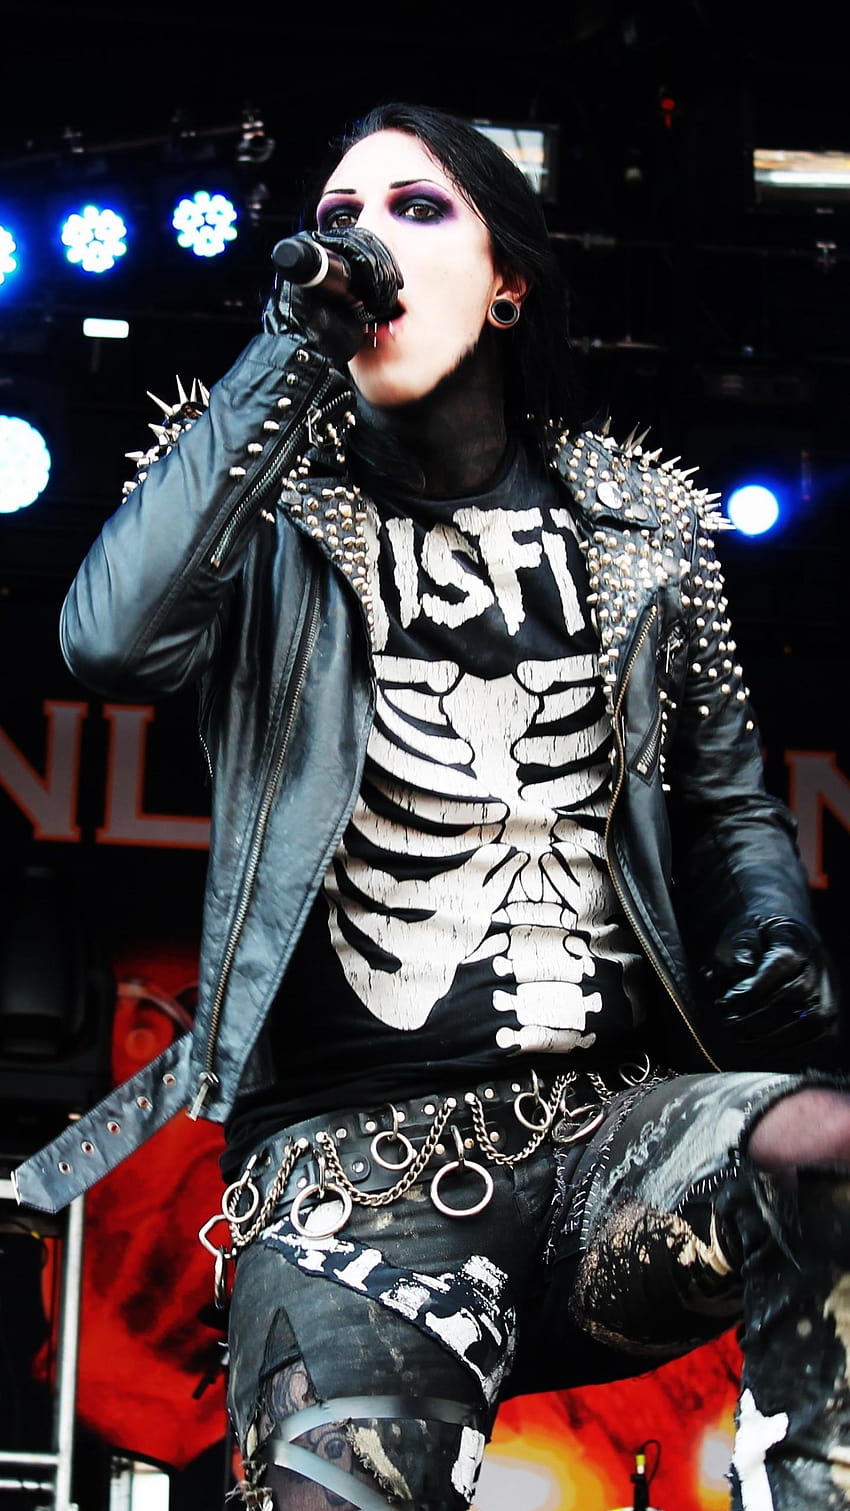 Chriss smile is perfect   Motionless in white Chris motionless Ricky  horror